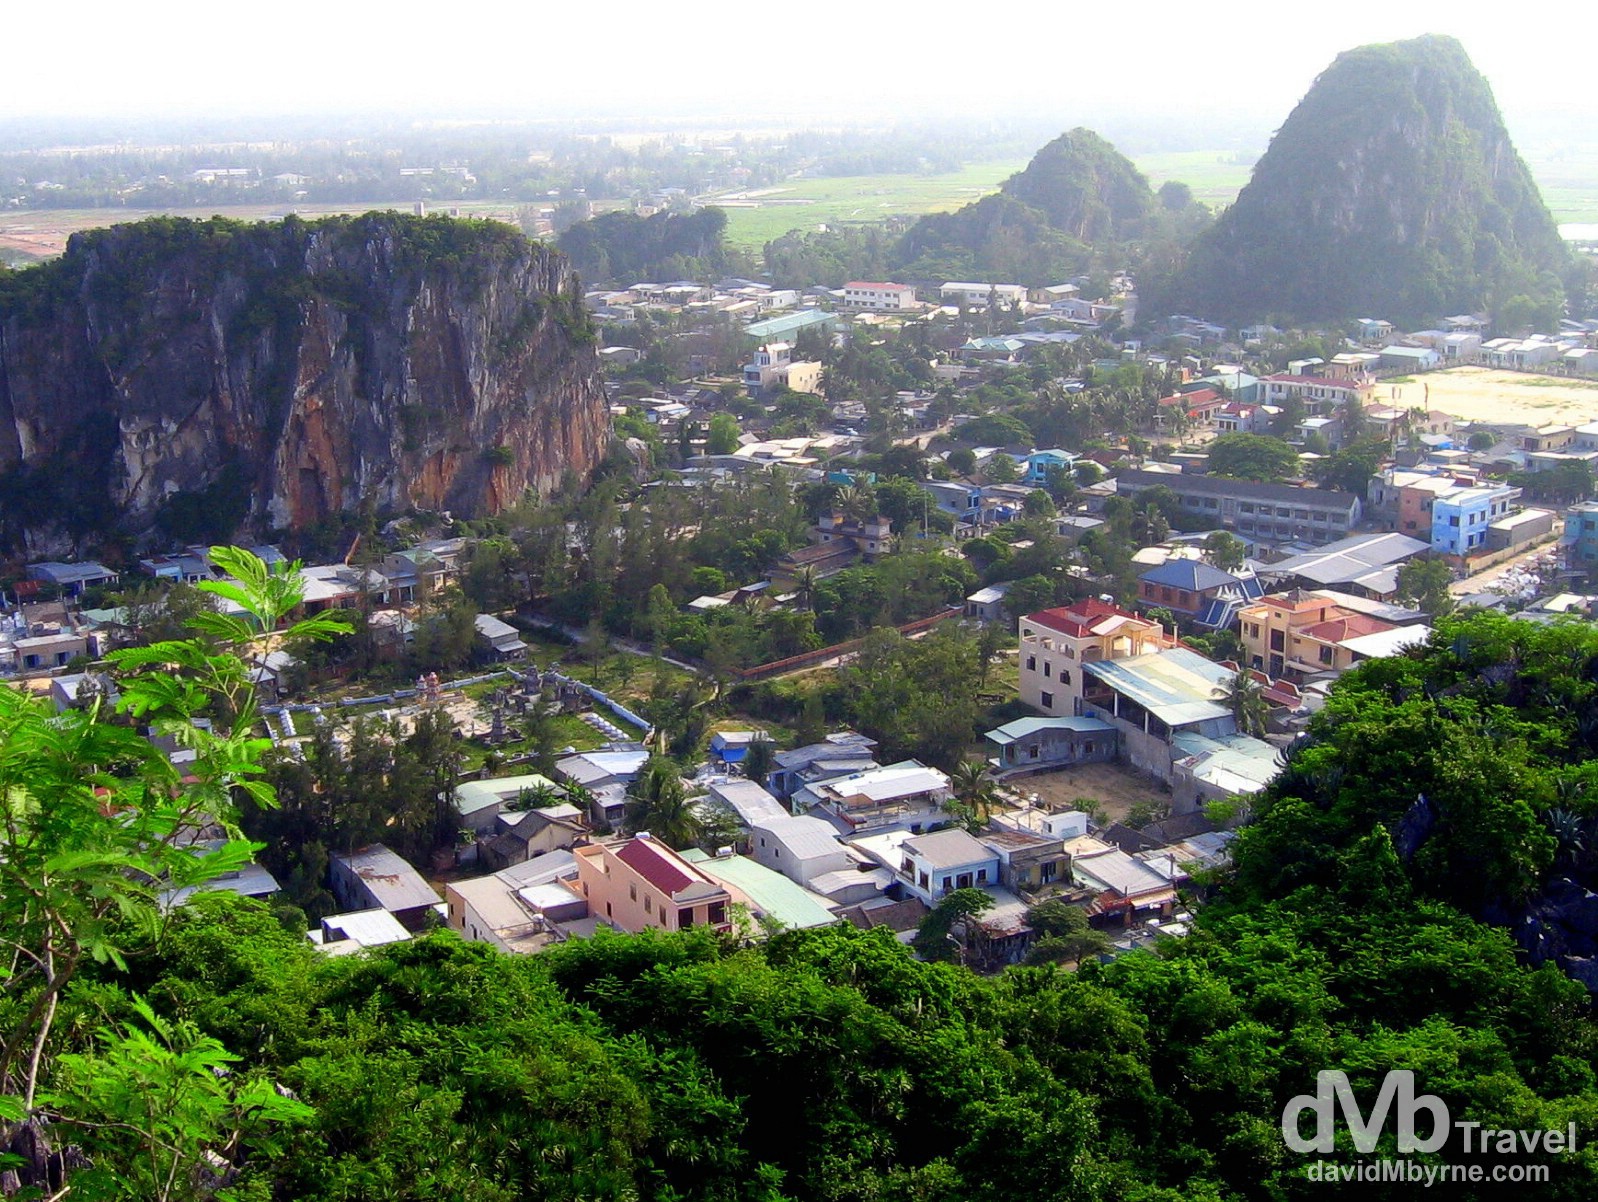 A section of the Marble Mountains outside Danang, Central Vietnam. September 10th 2005.